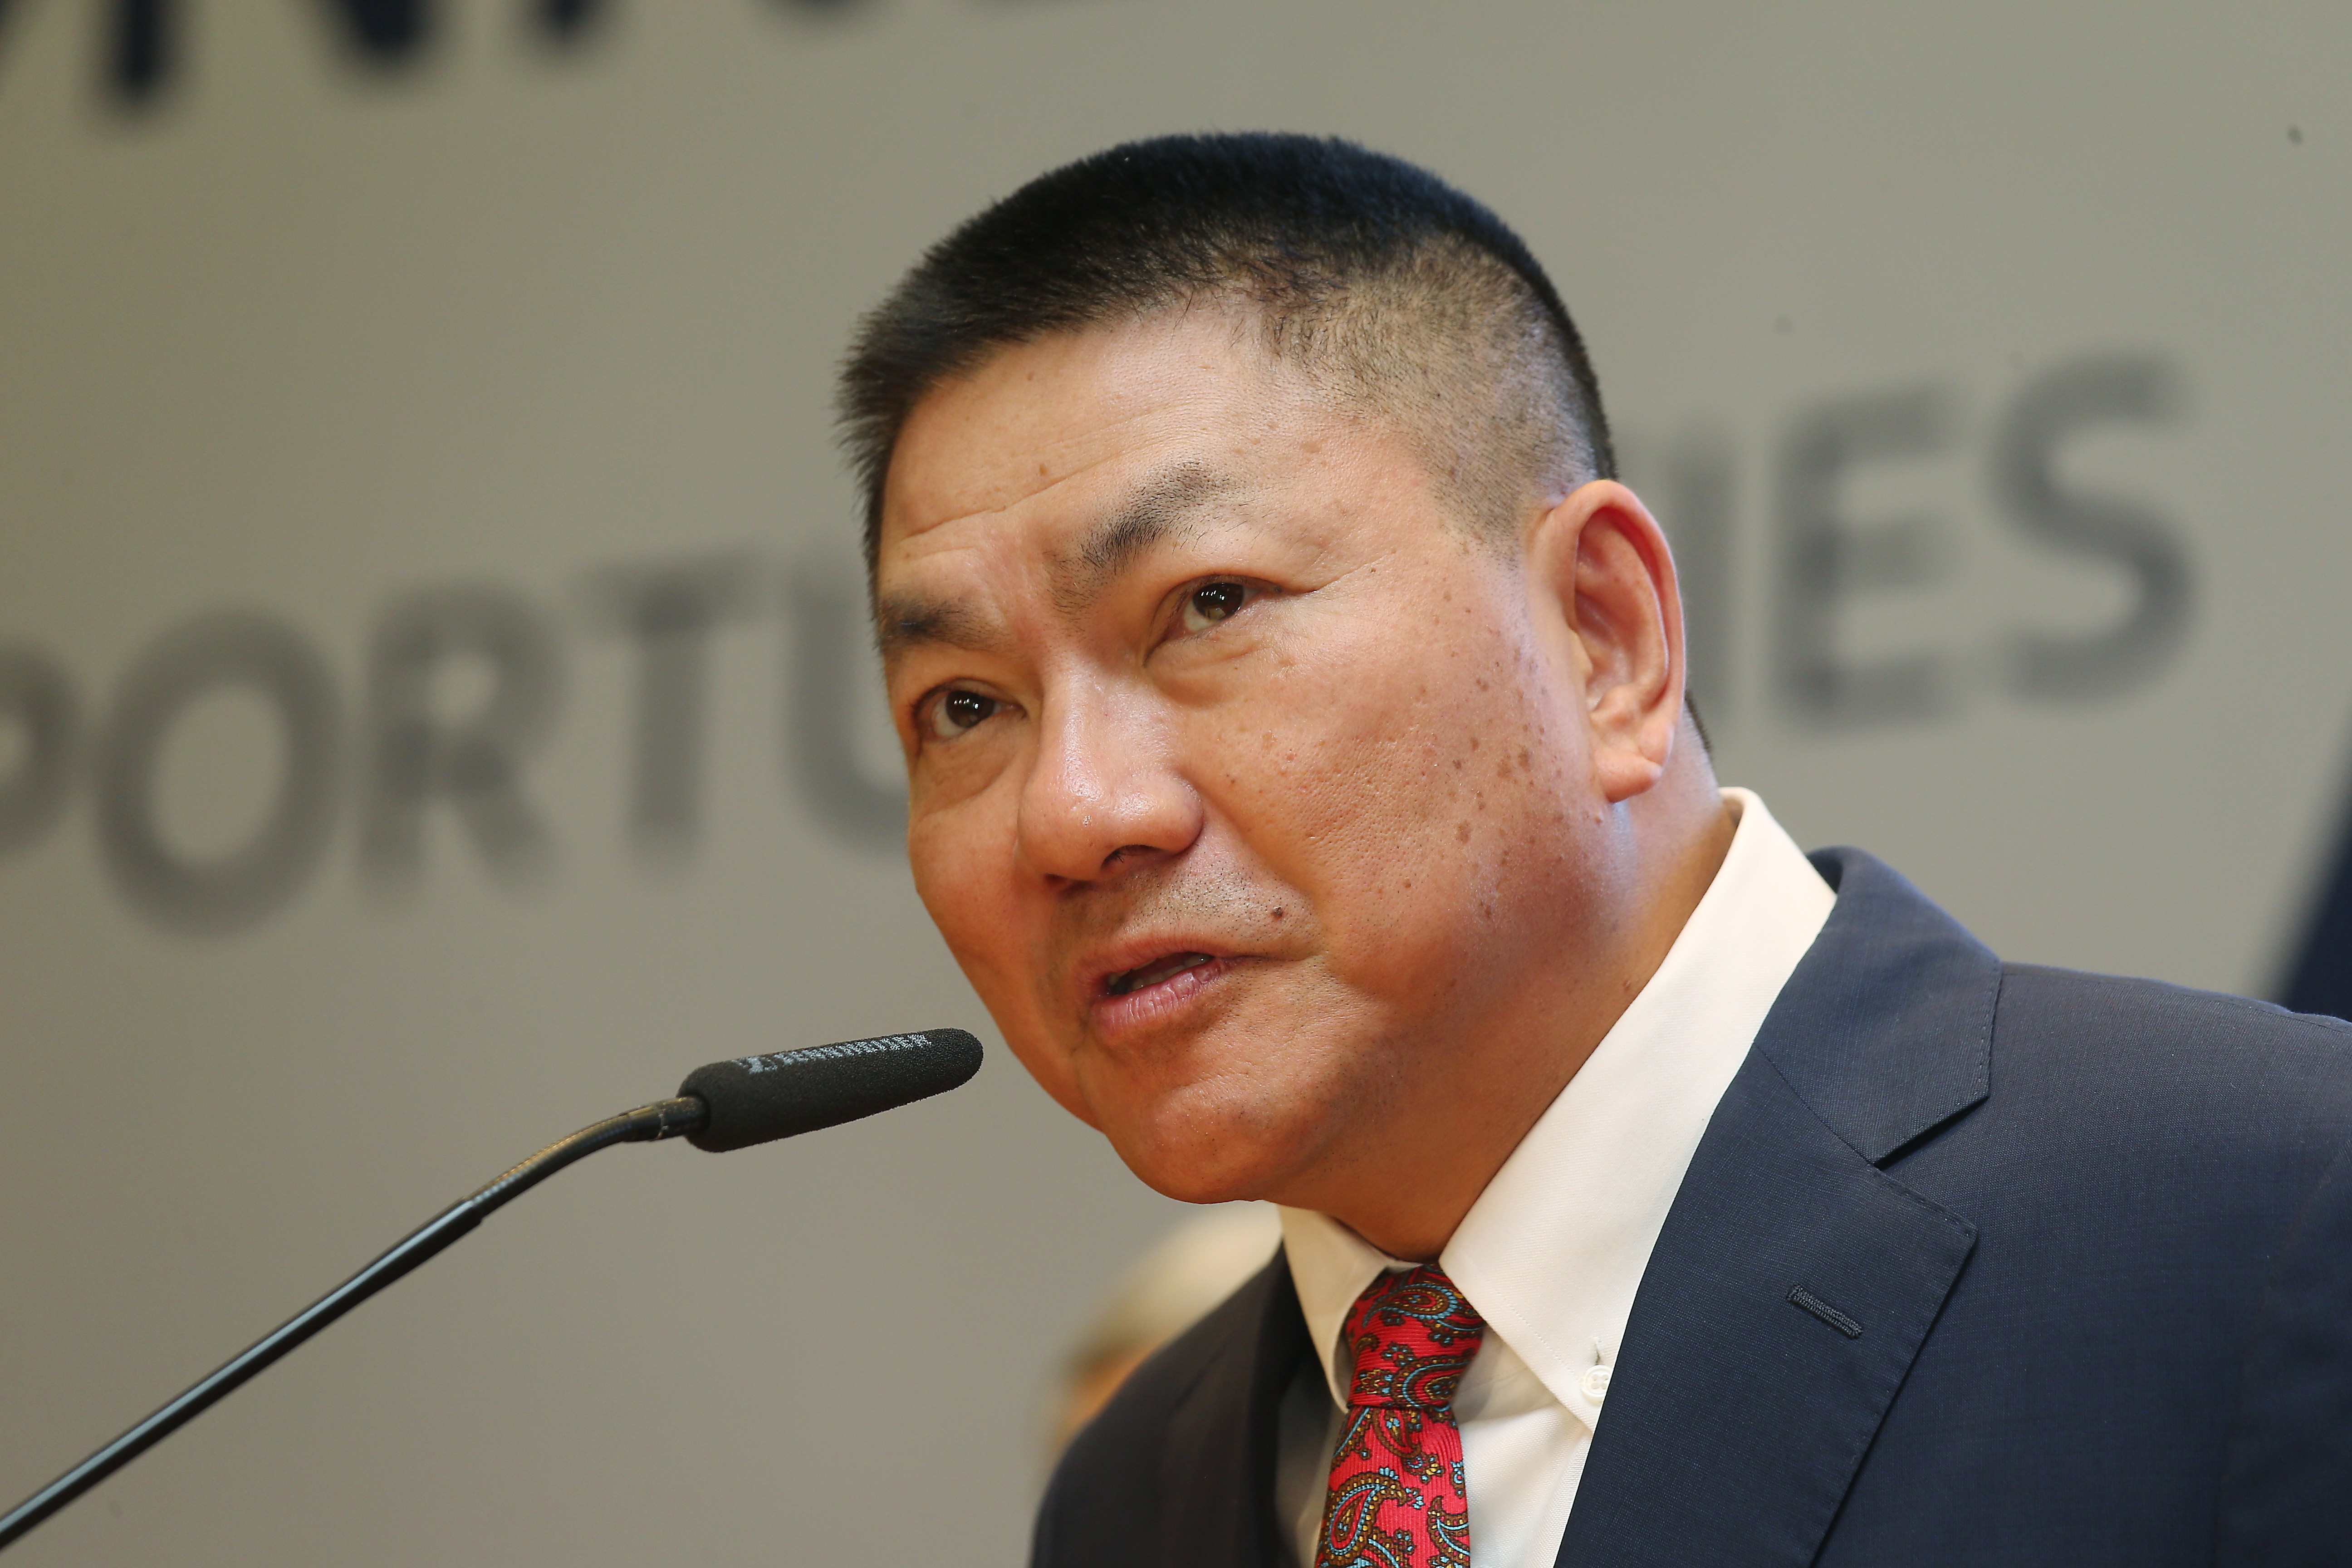 Value Partners, co-founded by Cheah Cheng Hye, has received a licence in China to launch onshore investment funds. Photo: K Y Cheng